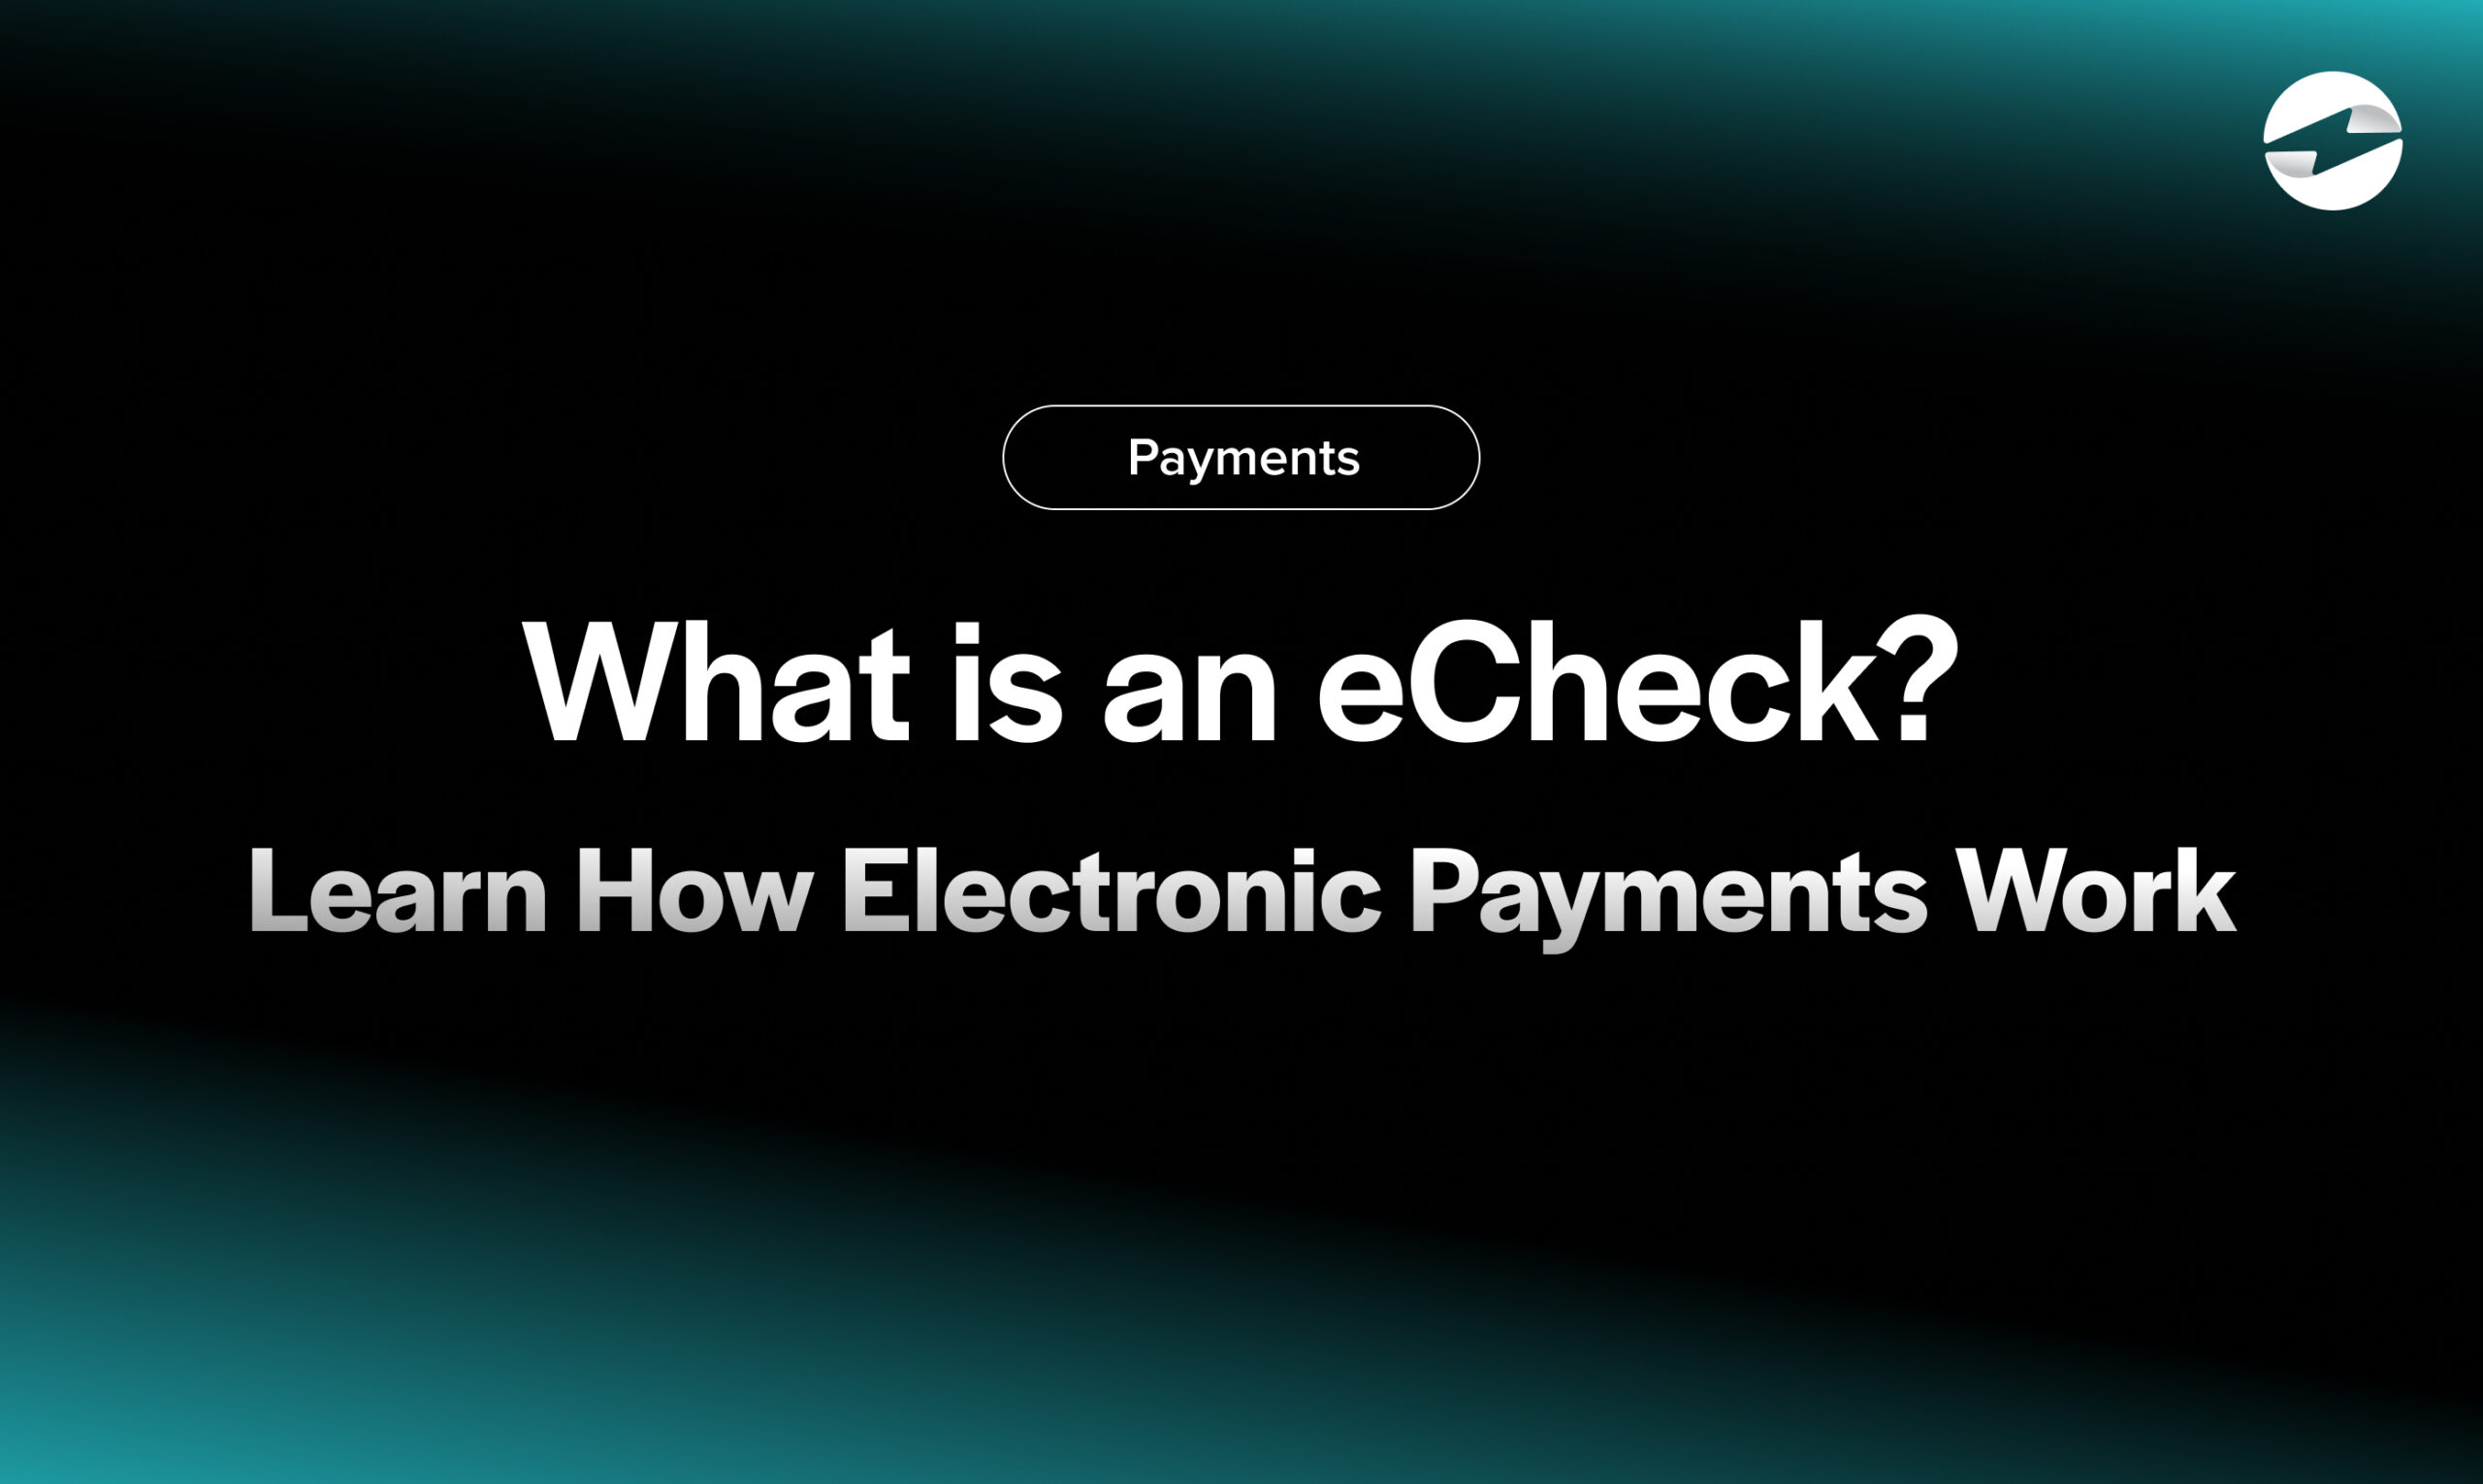 What is an eCheck